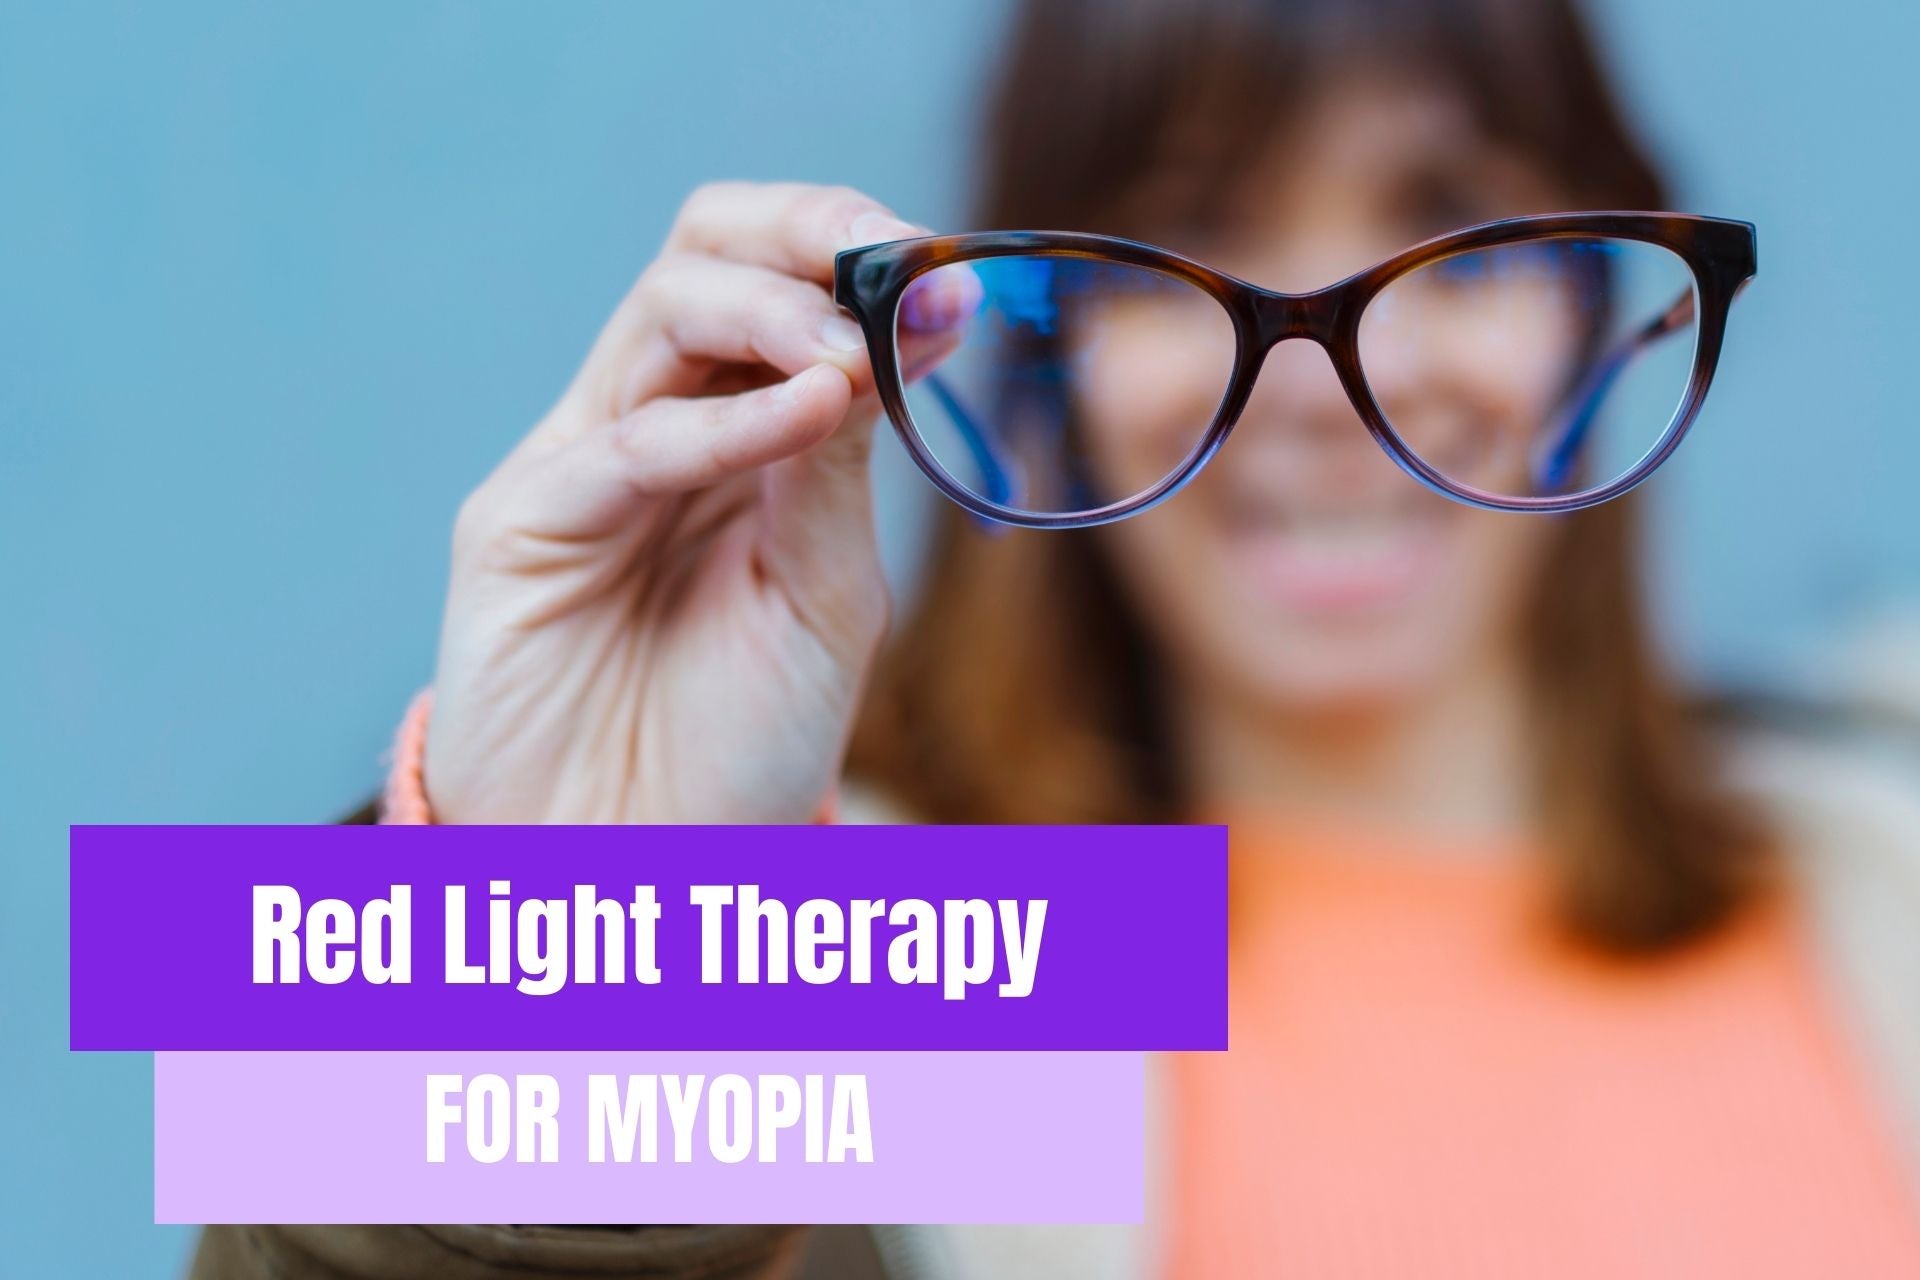 Red Light Therapy for Myopia